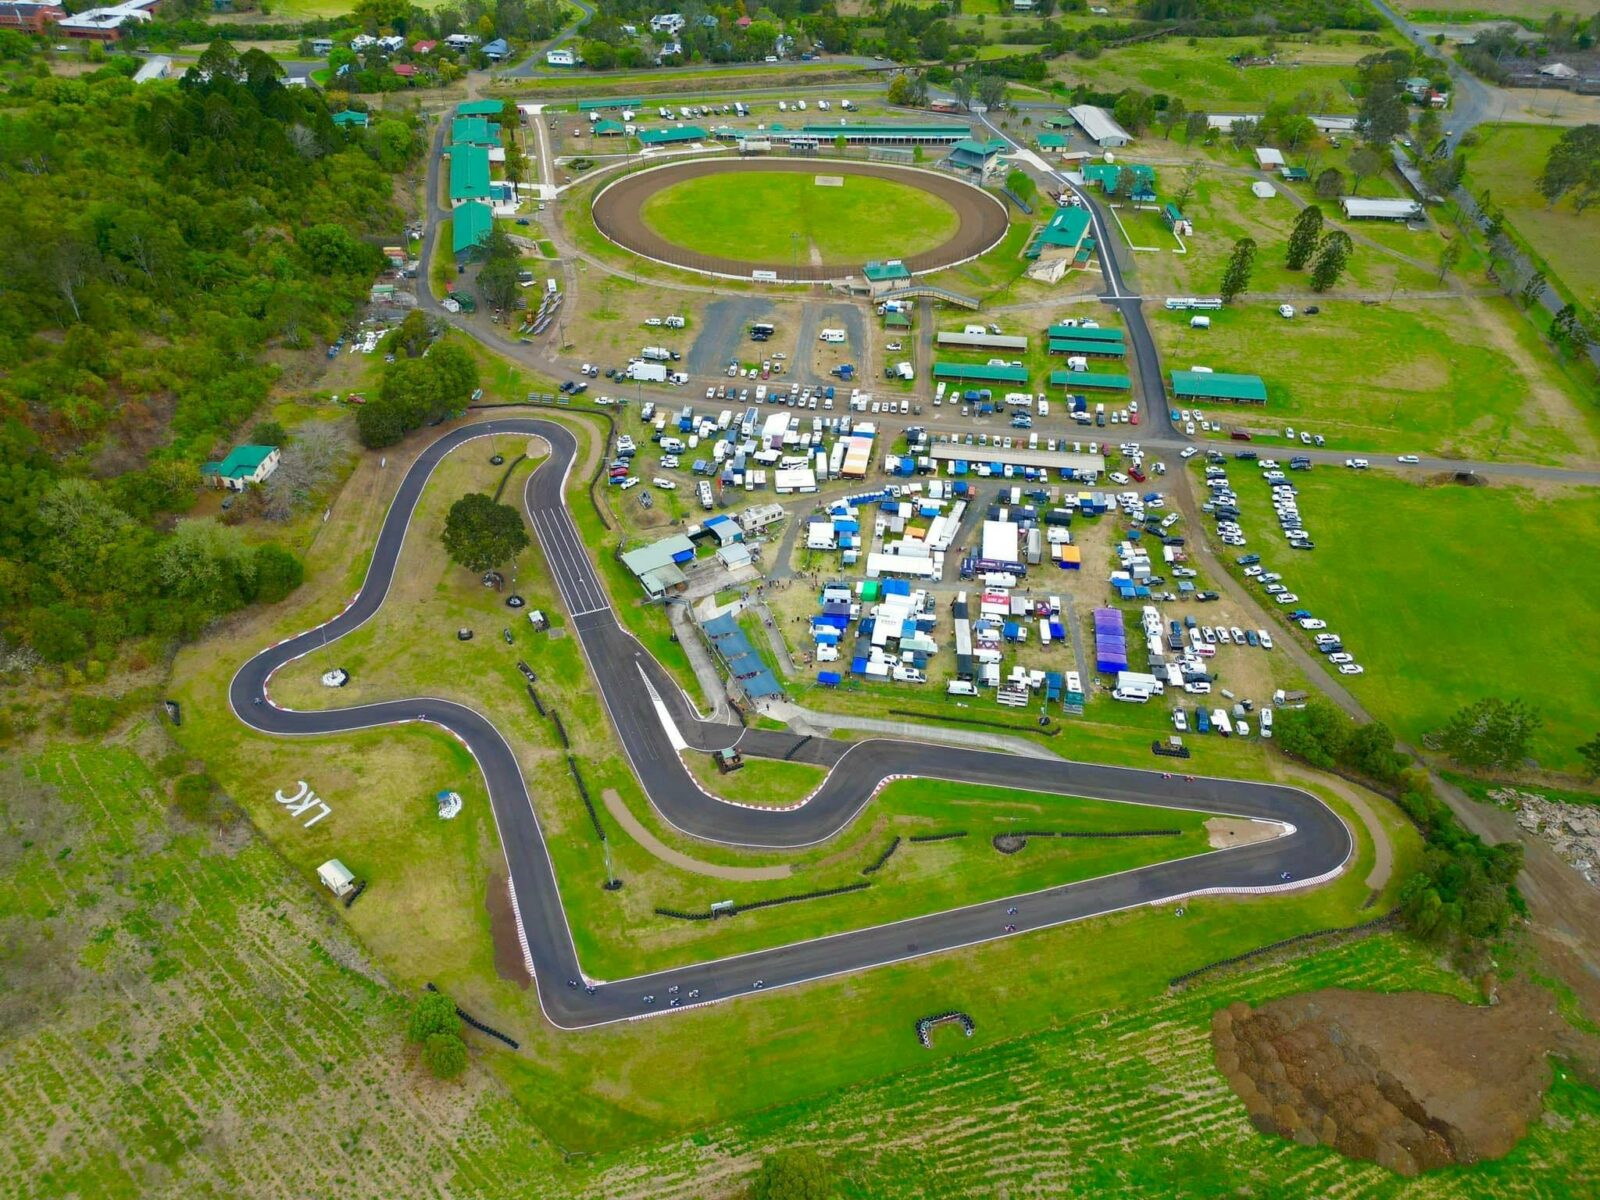 Aerial View of the track